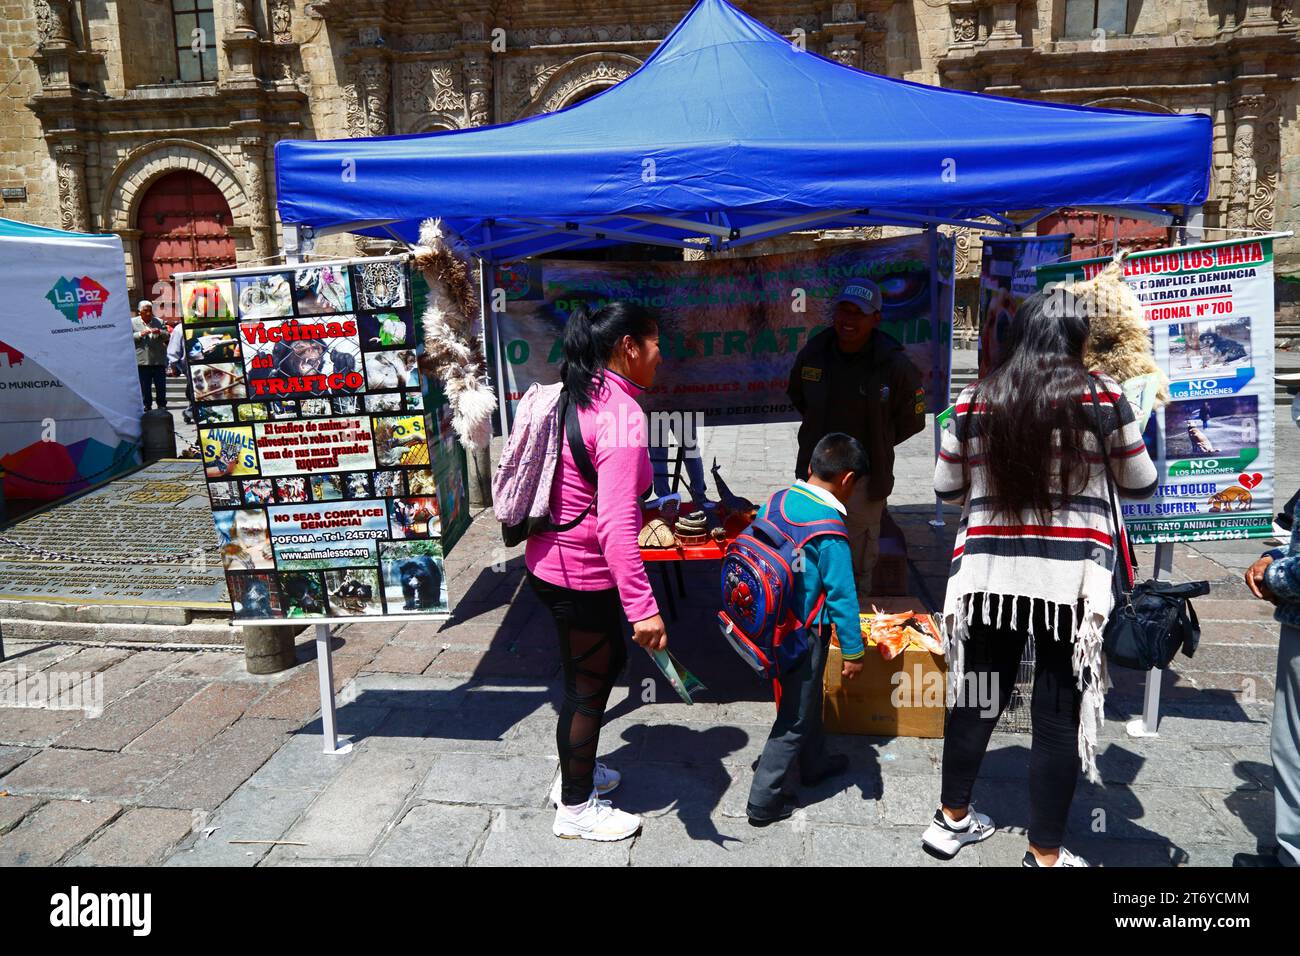 People visiting a stand by POFOMA (Policía Forestal y de Preservación del Medio Ambiente, the Forestry and Environment Preservation Police) to educate the public about about illegal wildlife trafficking and measures to take to report it, Plaza San Francisco, La Paz, Bolivia Stock Photo